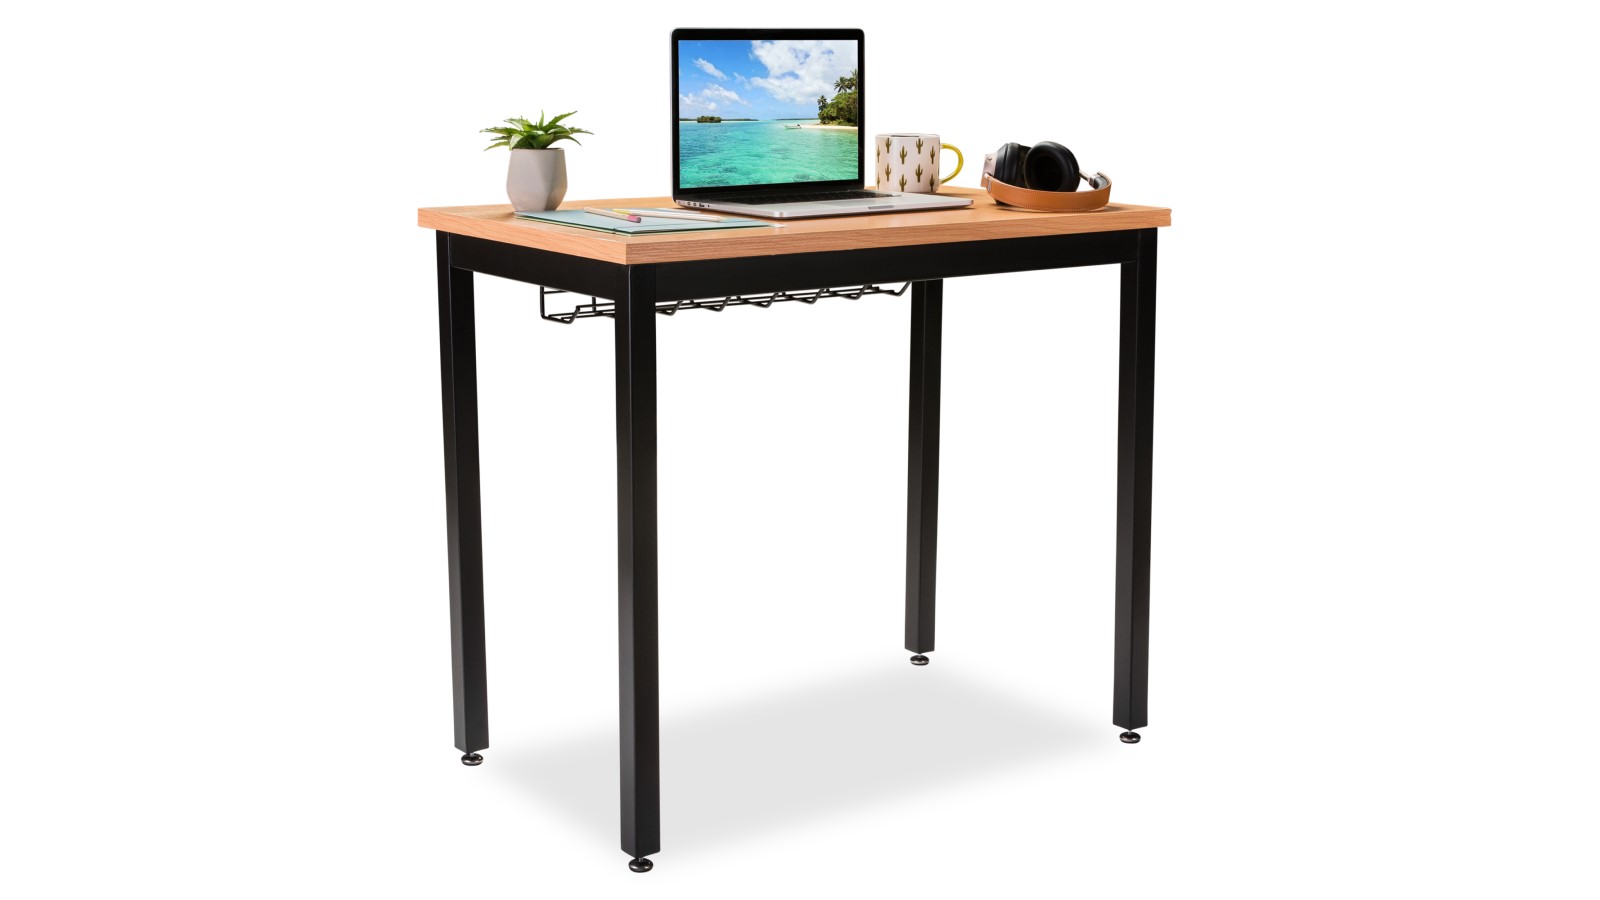 The Office Oasis Premium Small Computer Desk: Built to Last